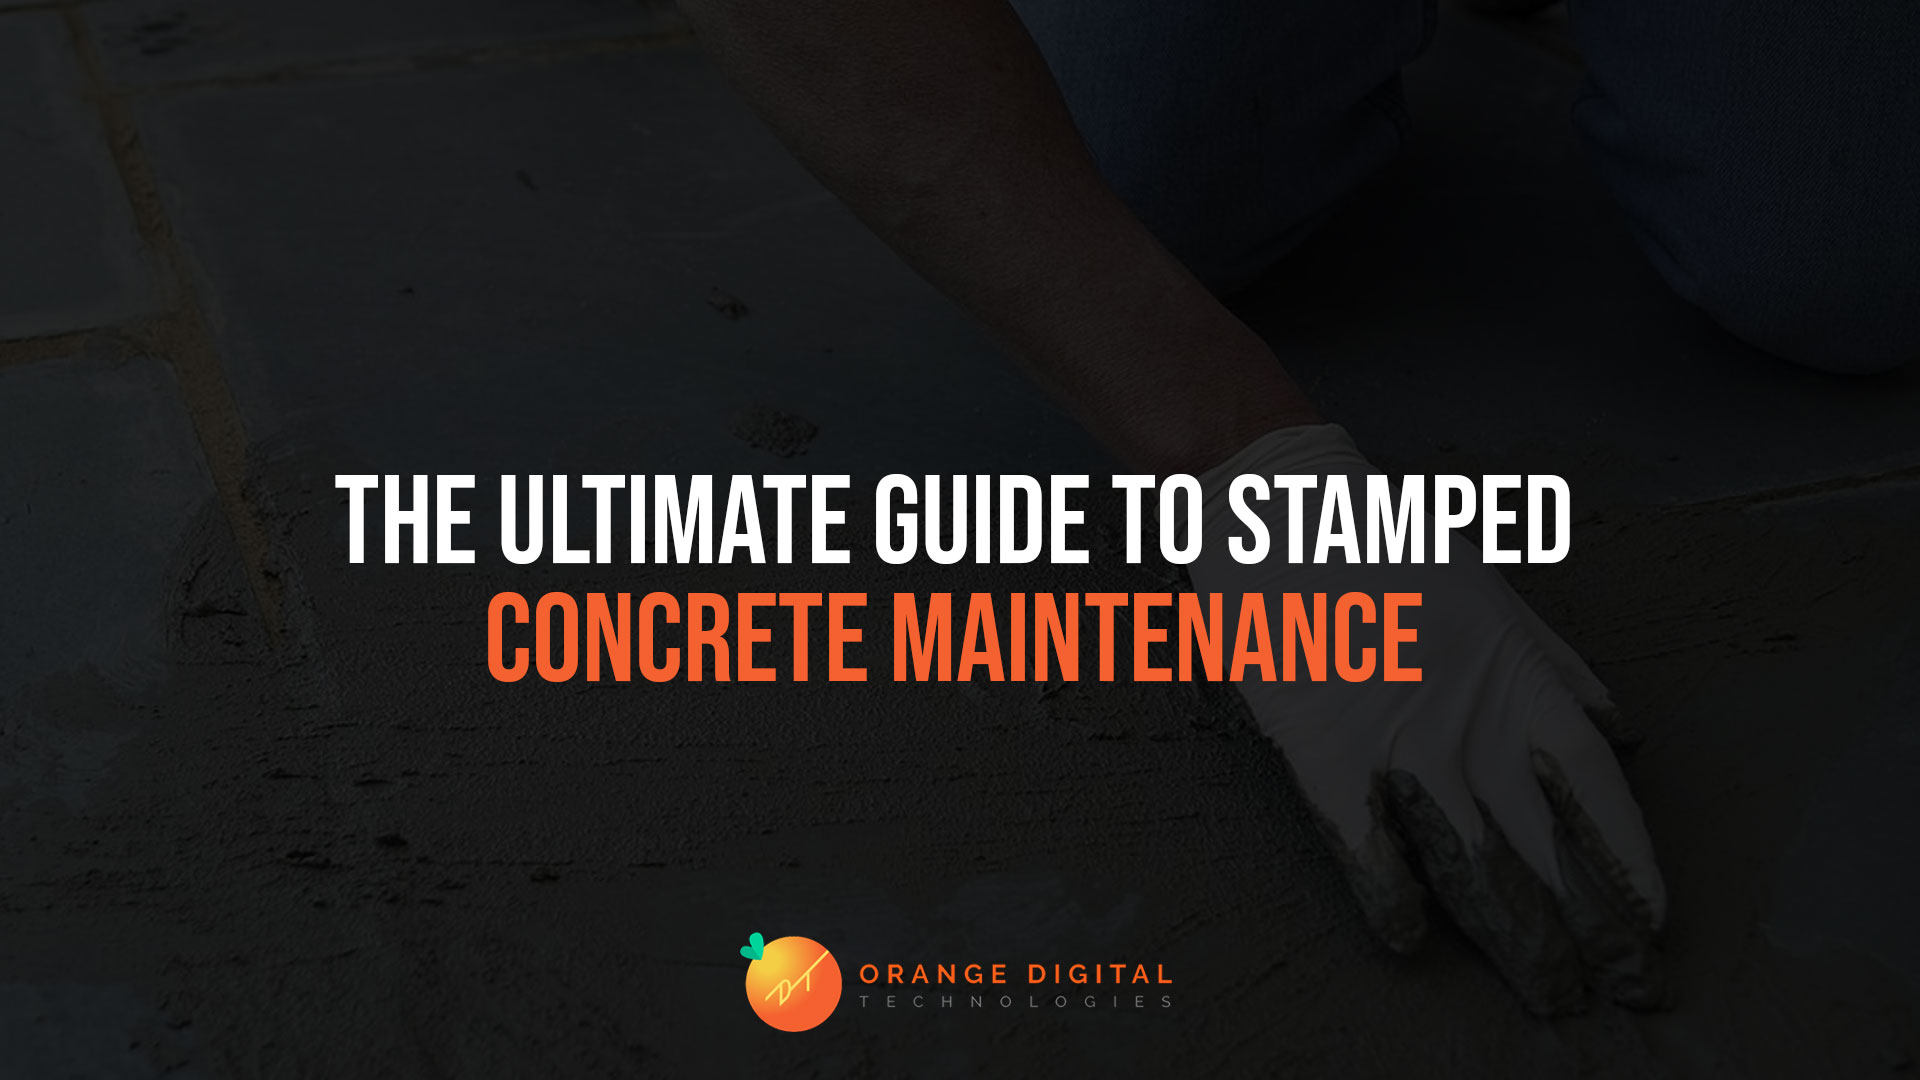 The Ultimate Guide to Stamped Concrete Maintenance